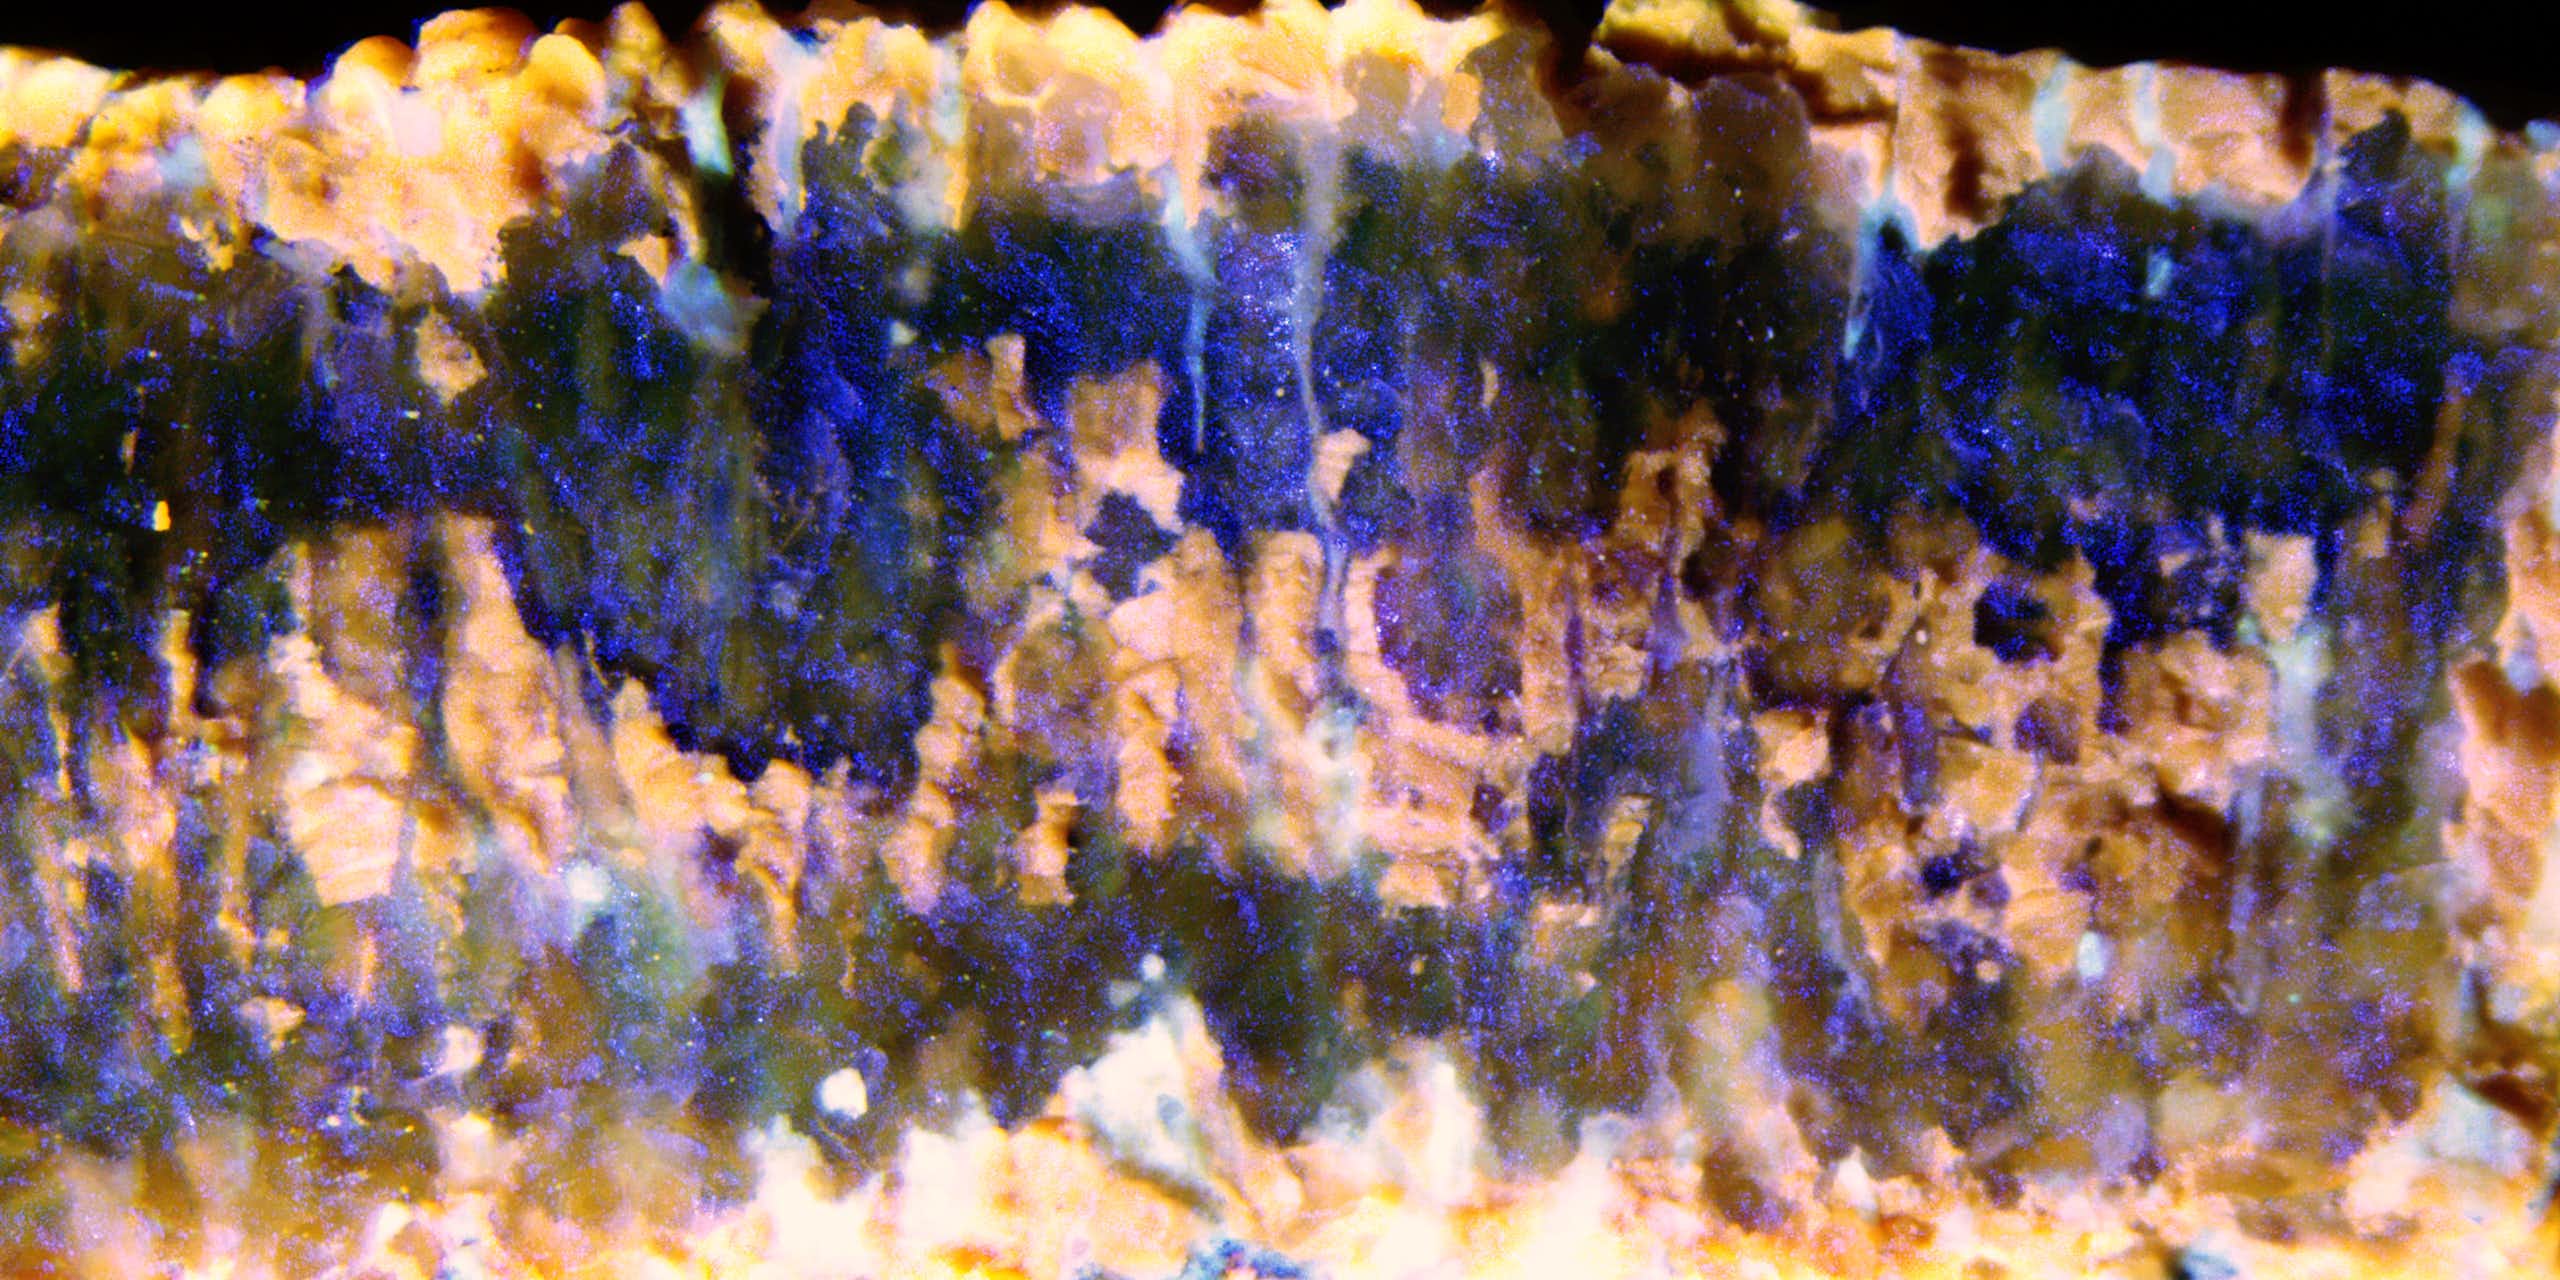 A cross section showing long, multicolor columnar structures.